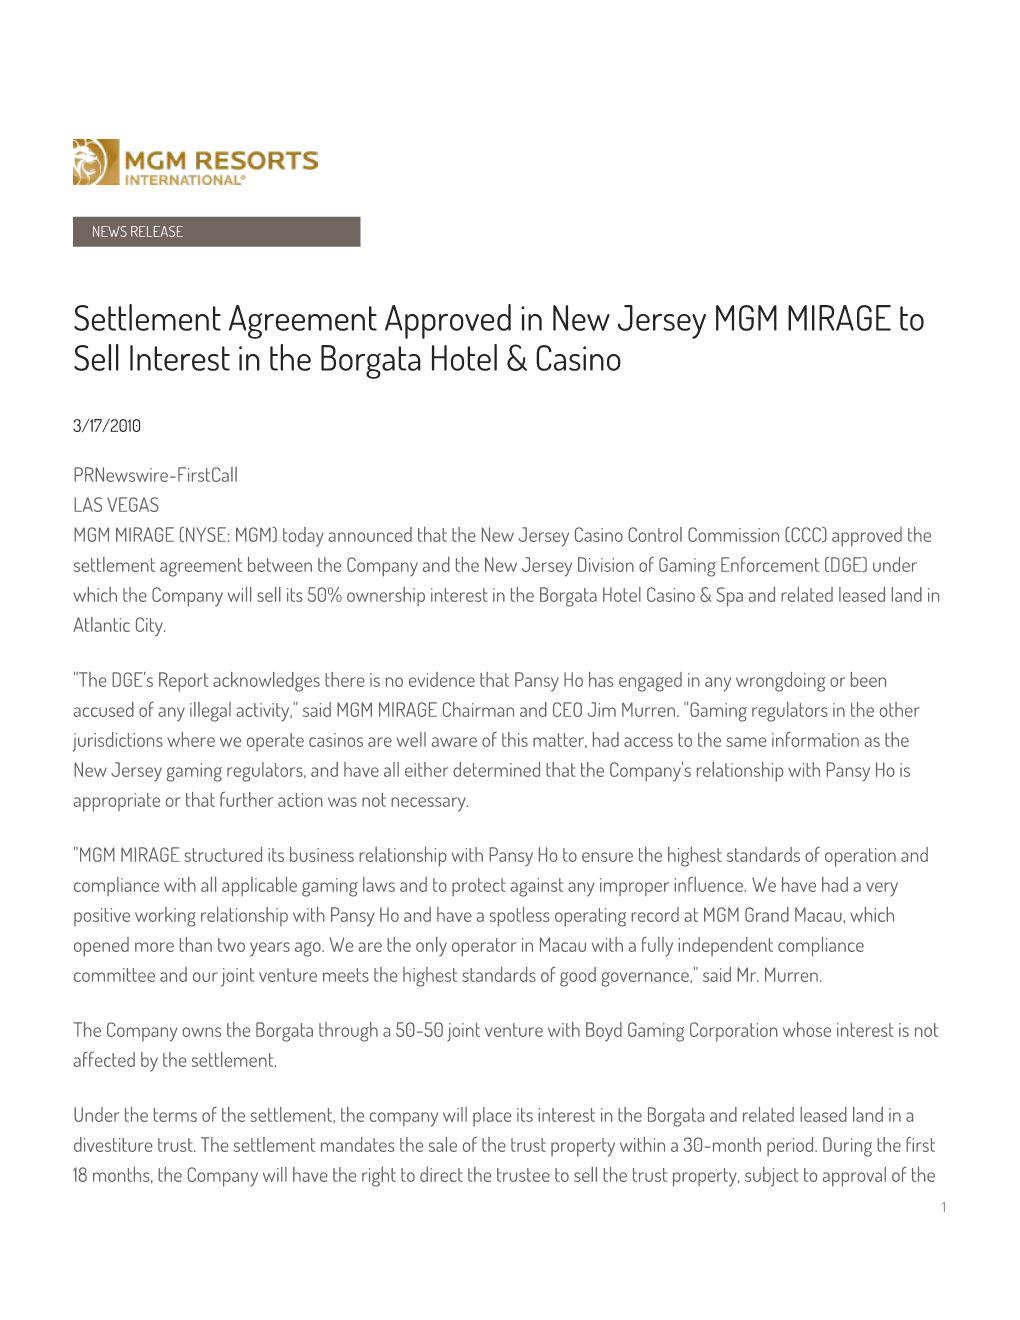 Settlement Agreement Approved in New Jersey MGM MIRAGE to Sell Interest in the Borgata Hotel & Casino